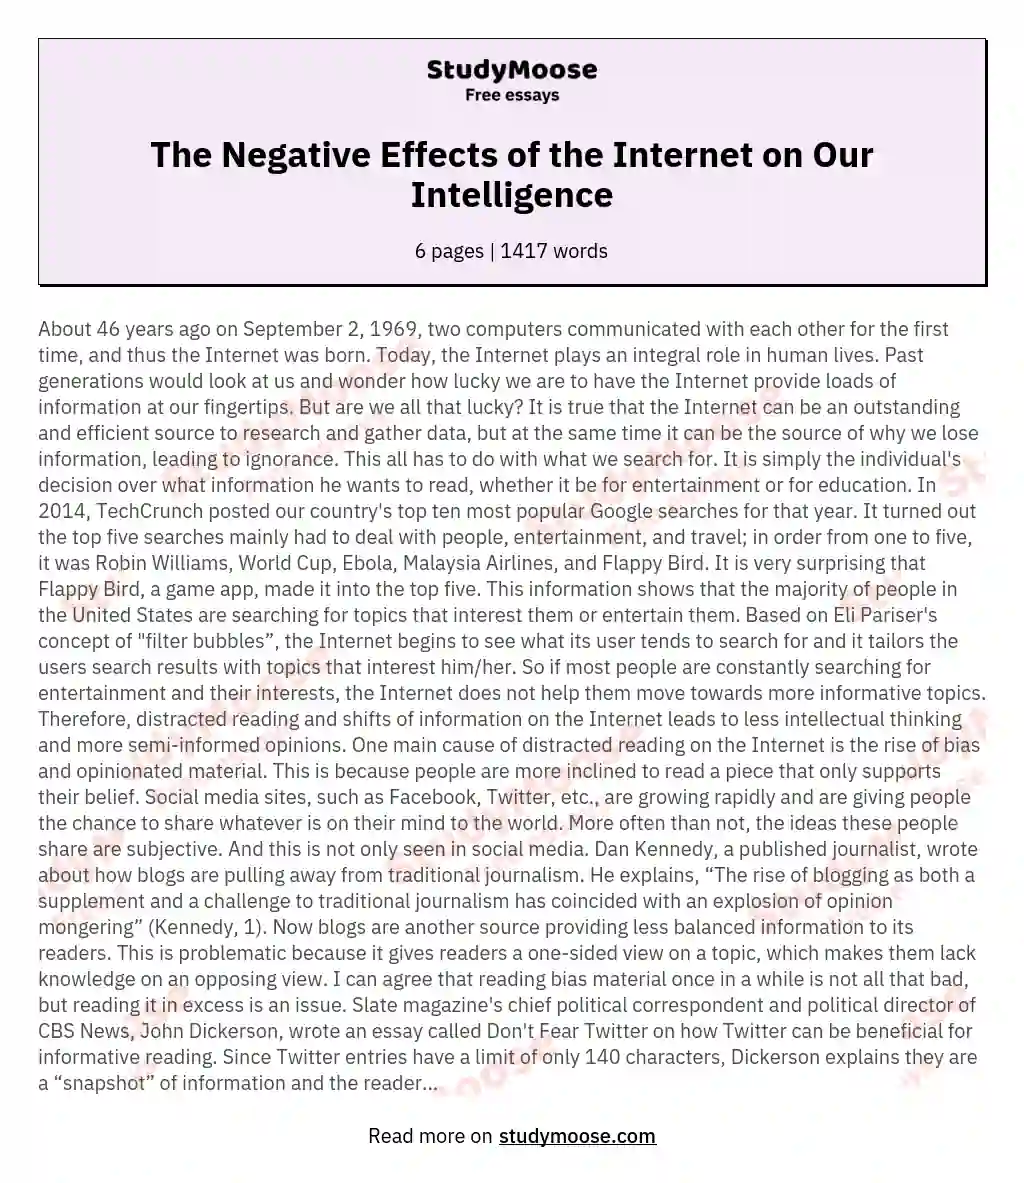 The Negative Effects of the Internet on Our Intelligence essay